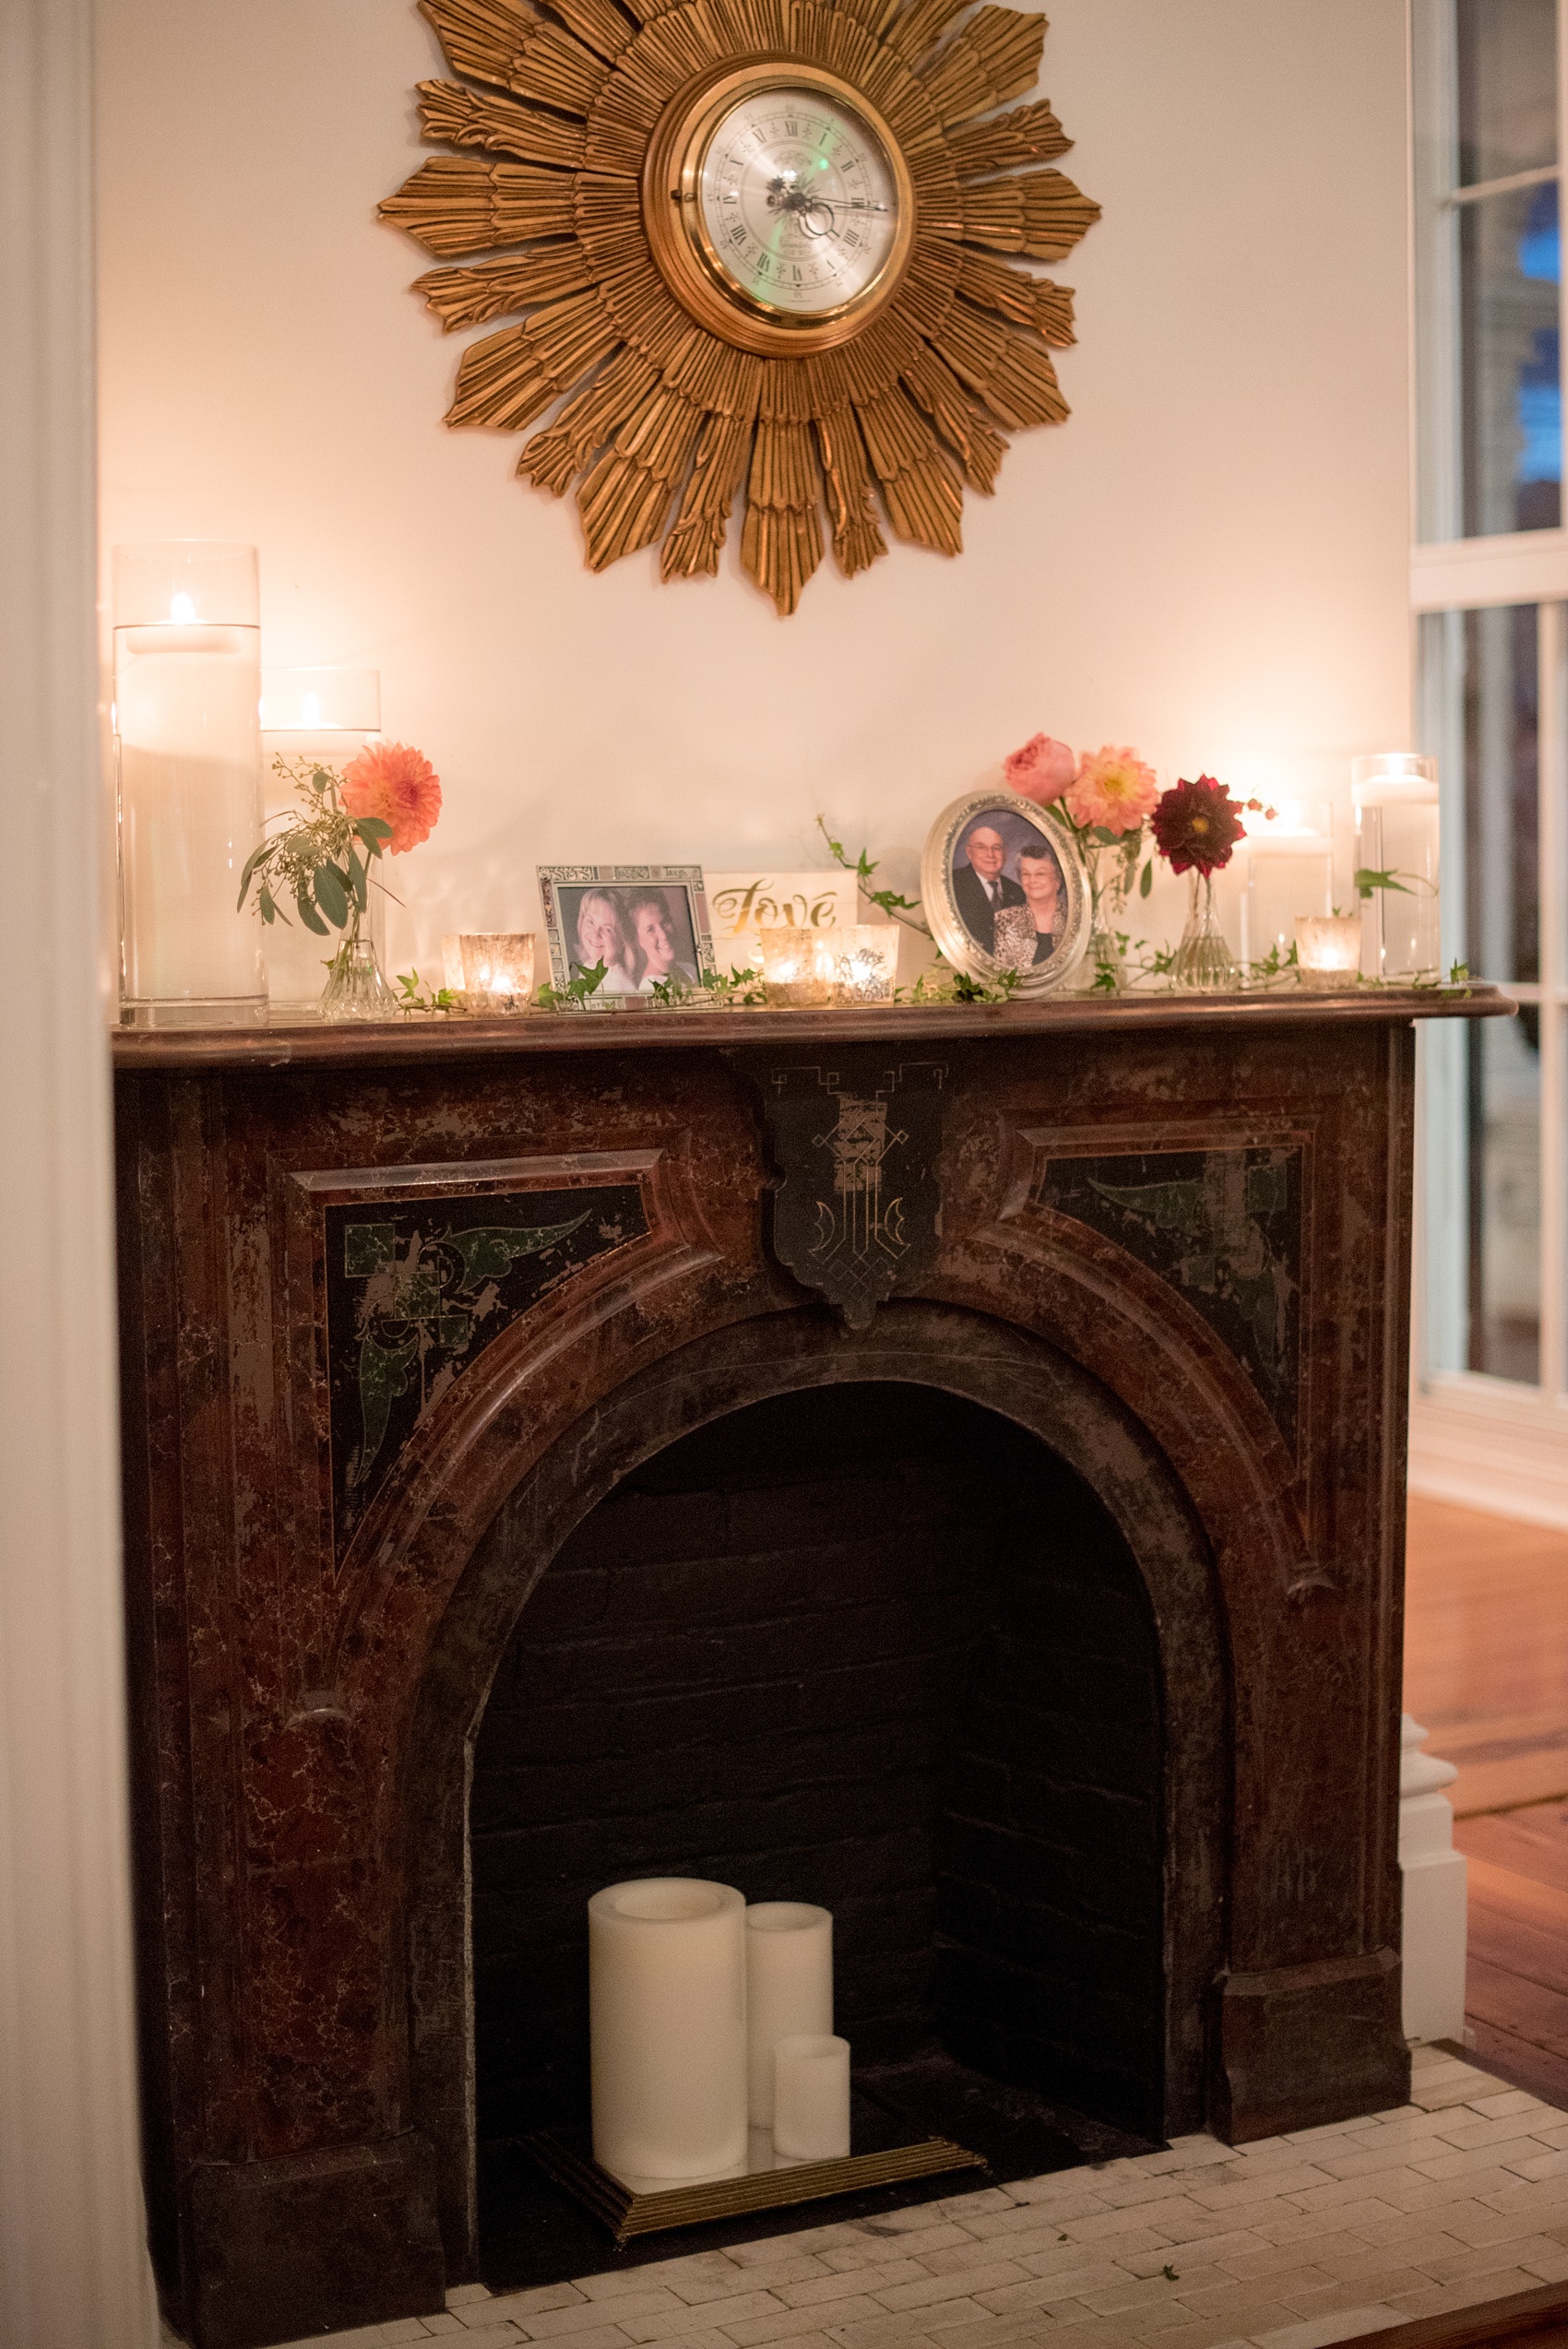 Mikkel Paige Photography photos from a Merrimon-Wynne House wedding in Raleigh complete with cozy interior fireplace details.